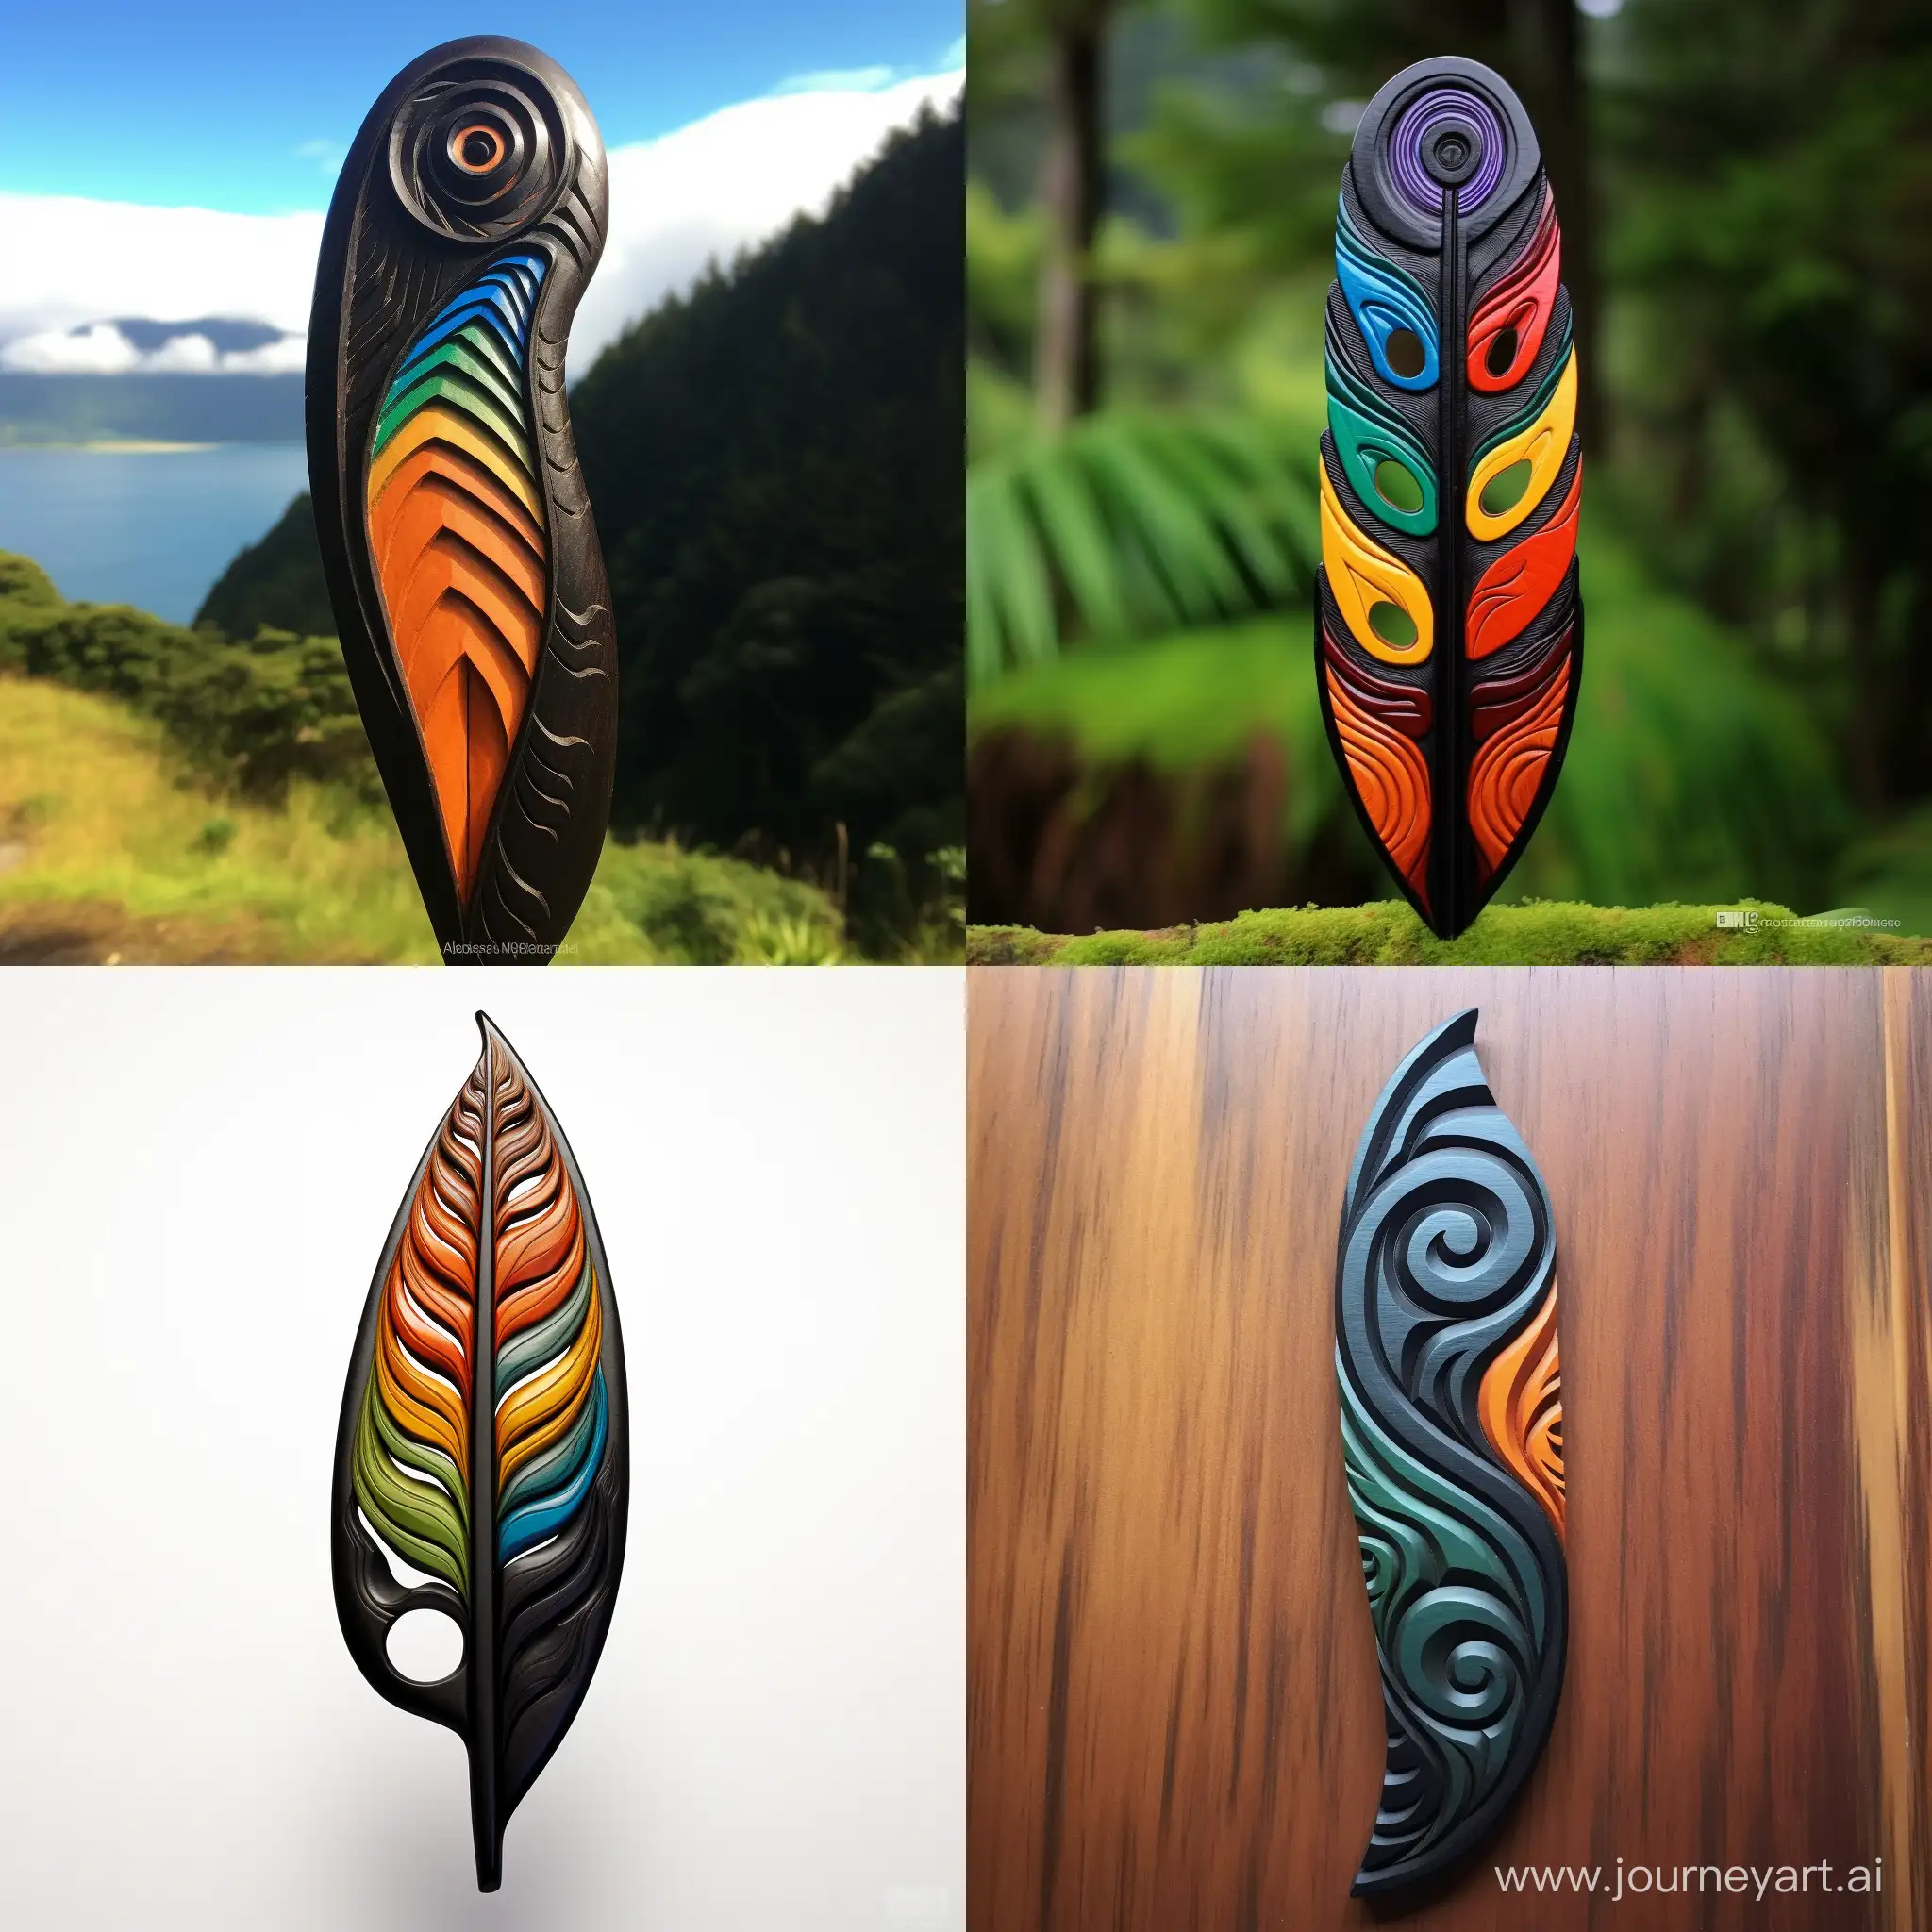 1 New Zealand Huia feather in the shape of an exclamation mark, carved, with an infinity symbol, a rainbow, a brain, Taranaki mountain, maori carving style